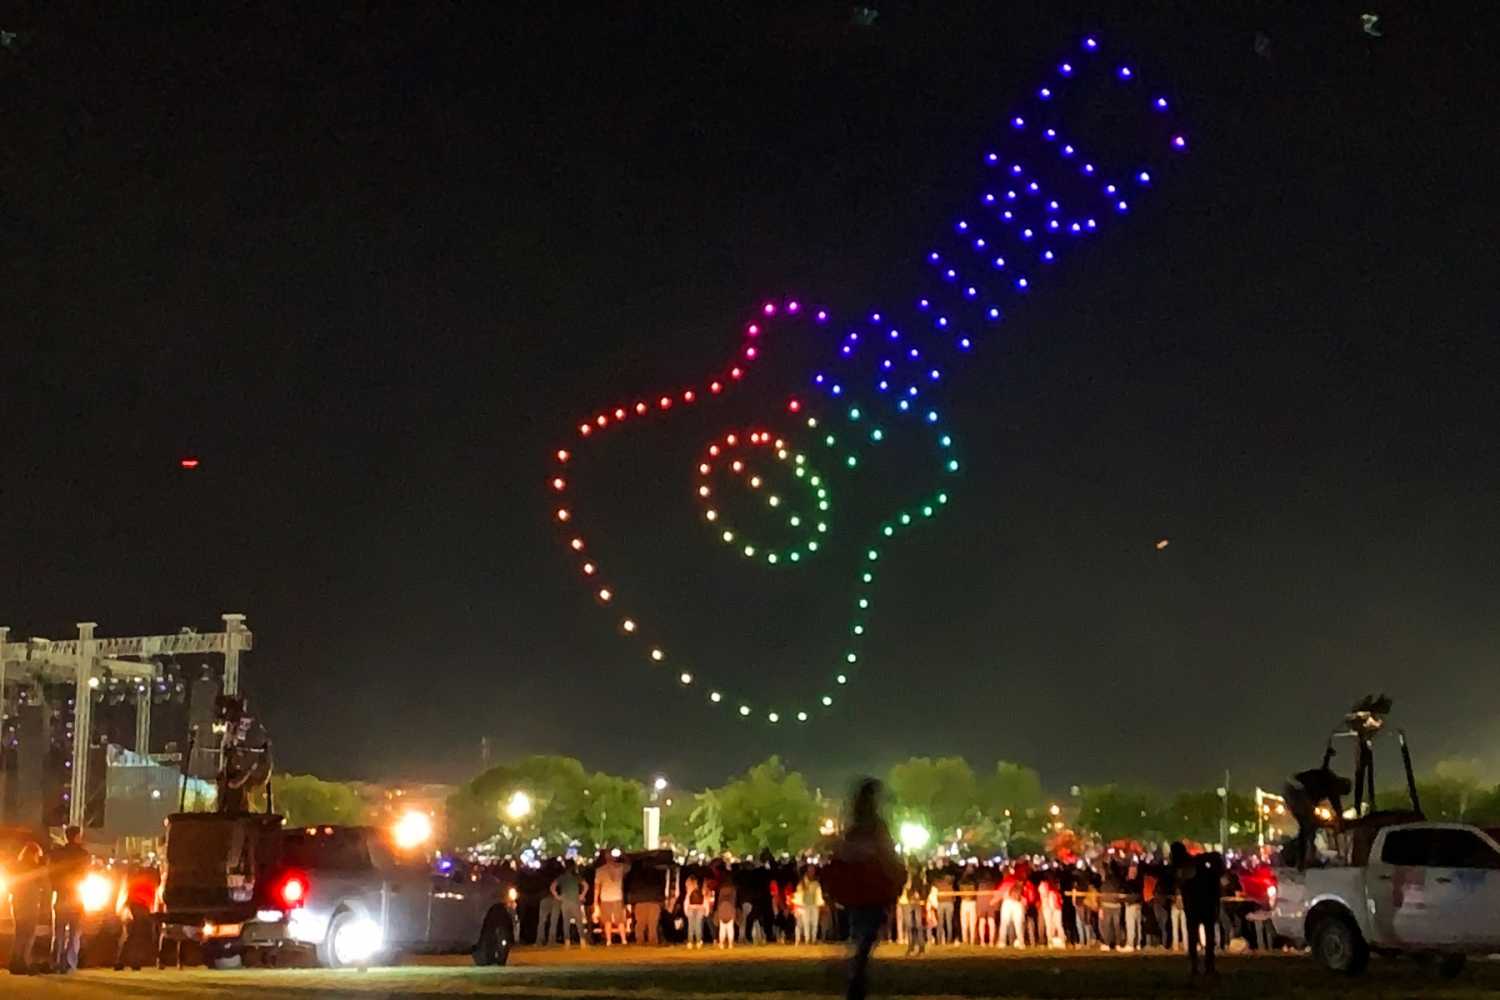 Verge Aero provided 150 drone lights to create moving, colour-changing pictures in the sky